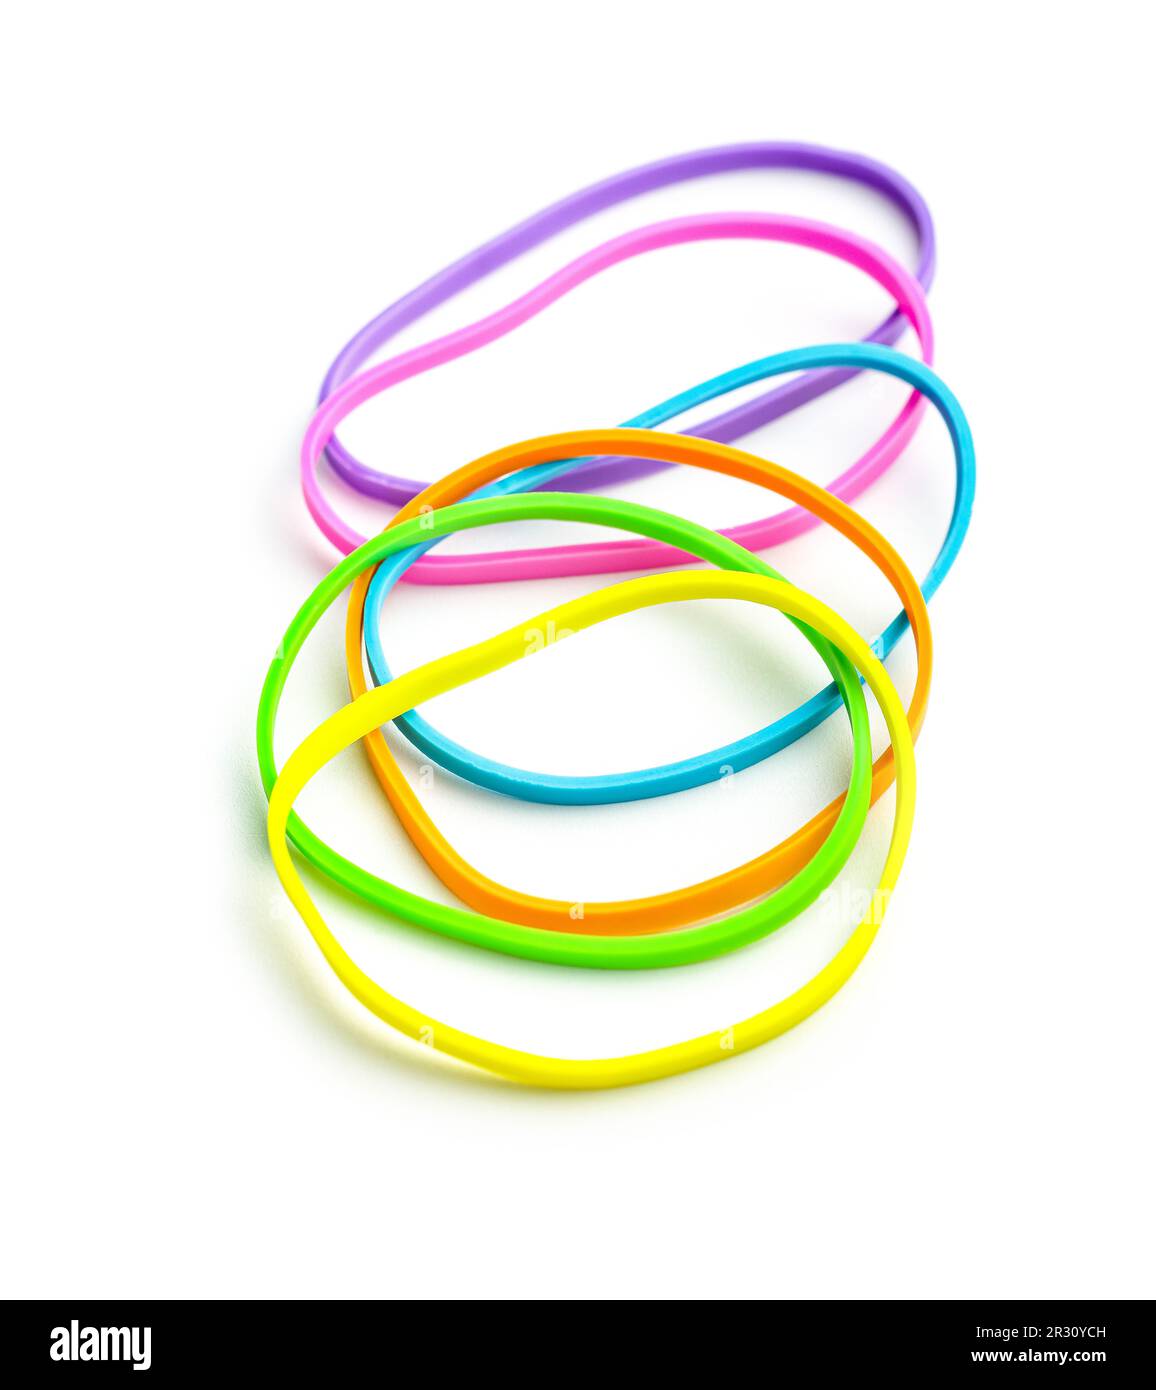 Group Of Colored Rubber Bands Stock Photo - Download Image Now